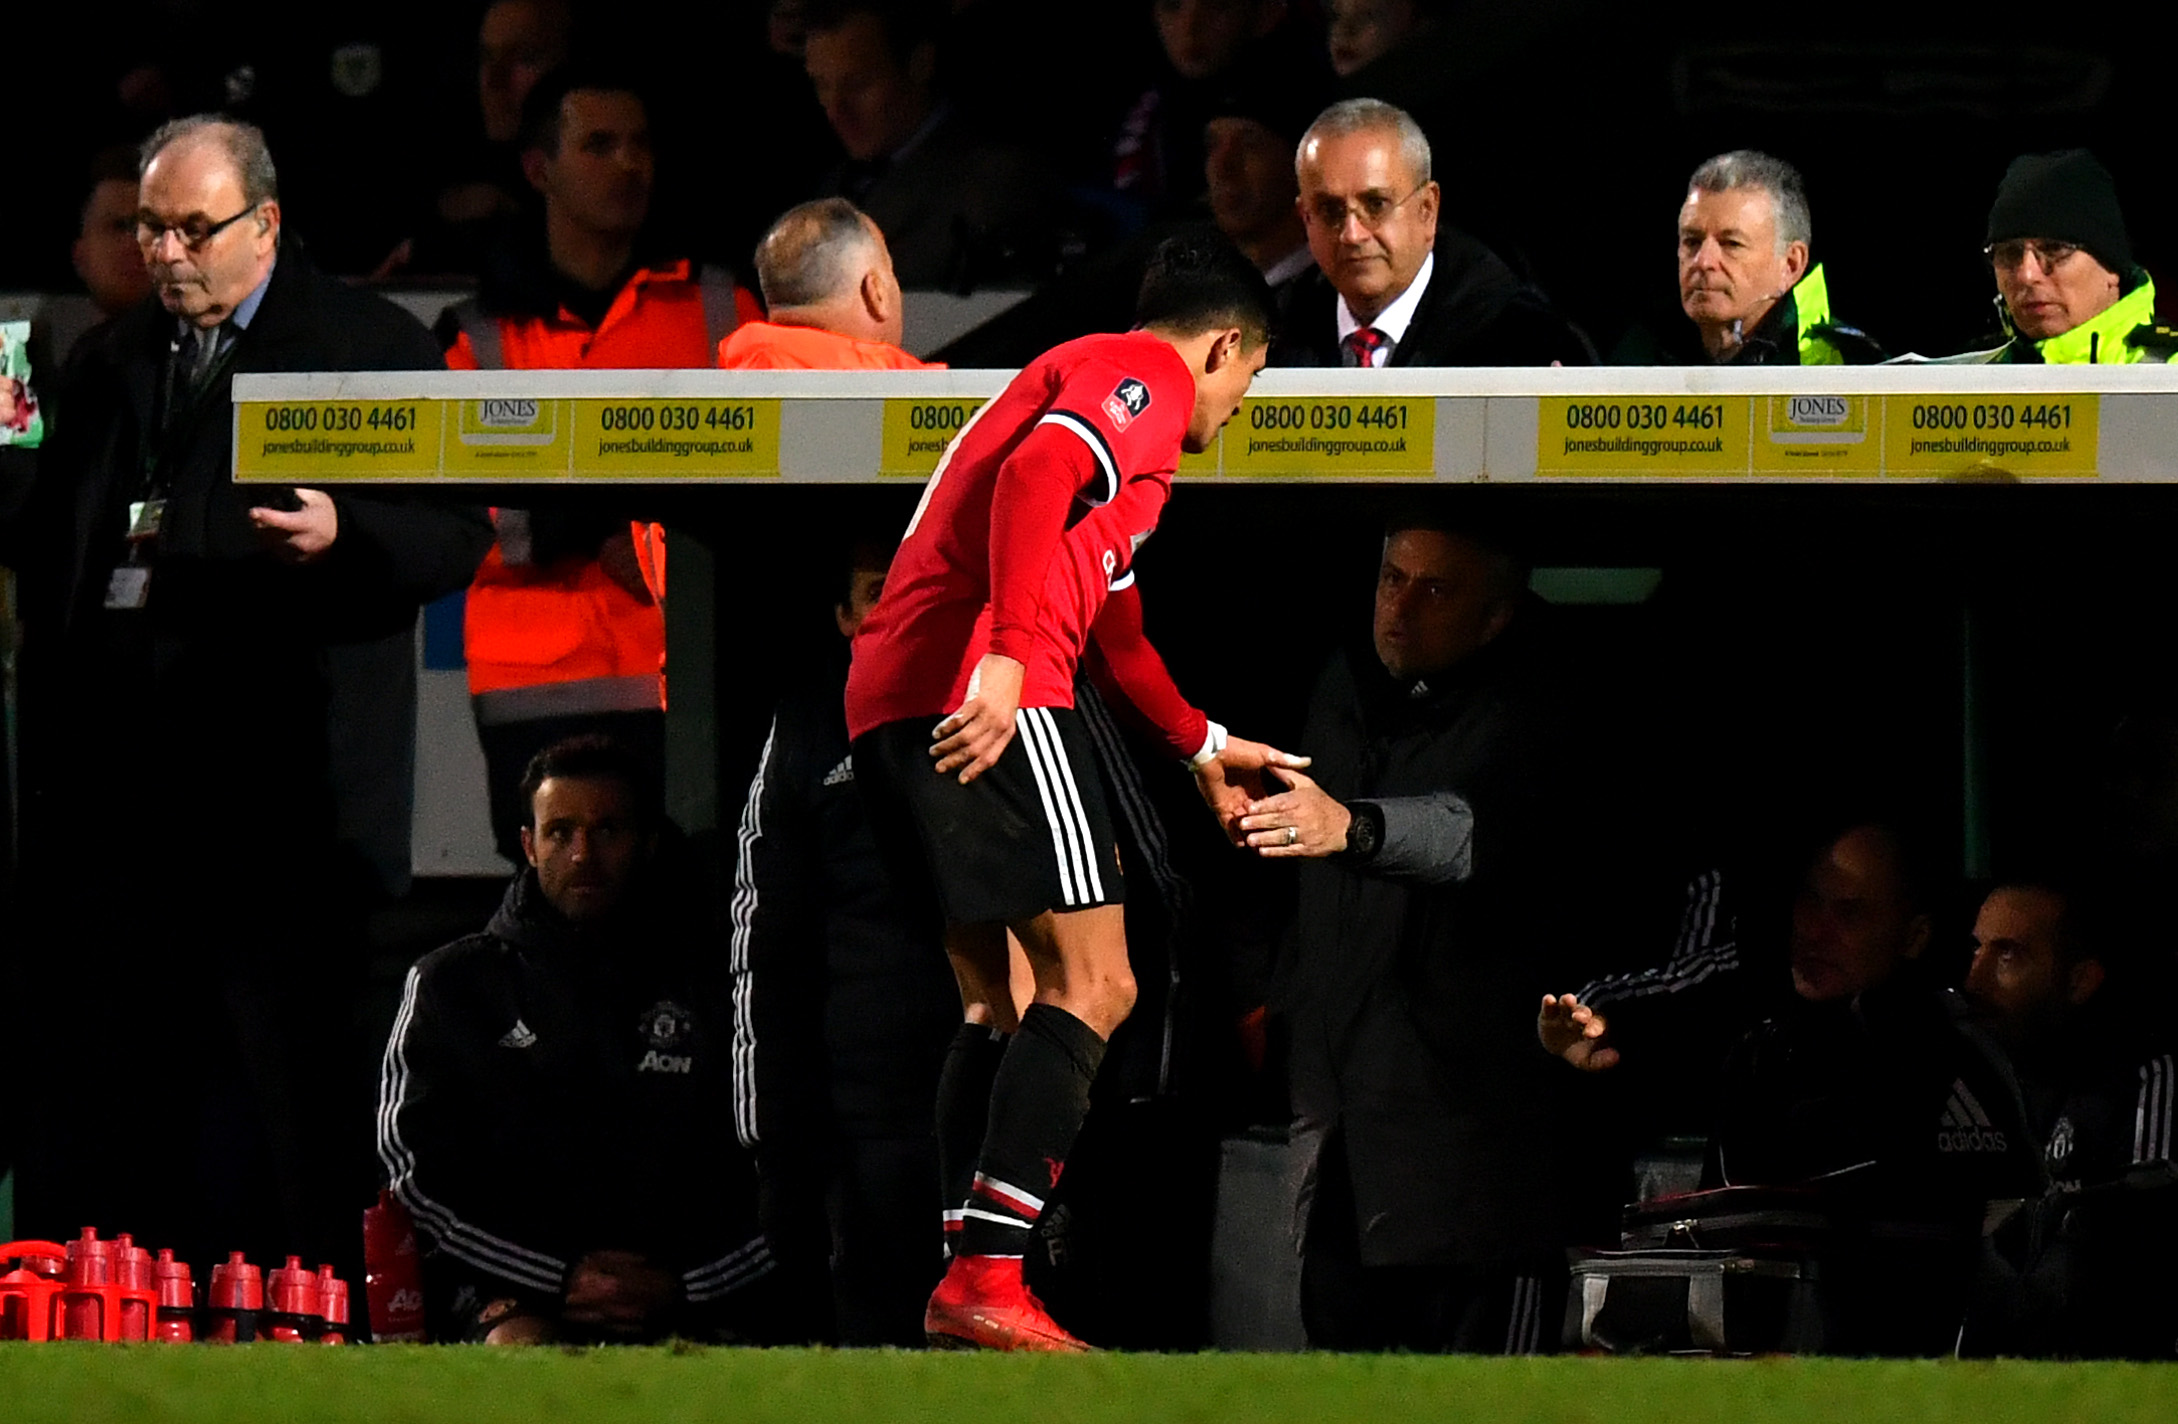 YEOVIL, ENGLAND - JANUARY 26:  Alexis Sanchez of Manchester United shakes hands with Jose Mourinho, Manager of Manchester United as he is substituted during The Emirates FA Cup Fourth Round match between Yeovil Town and Manchester United at Huish Park on January 26, 2018 in Yeovil, England.  (Photo by Dan Mullan/Getty Images)